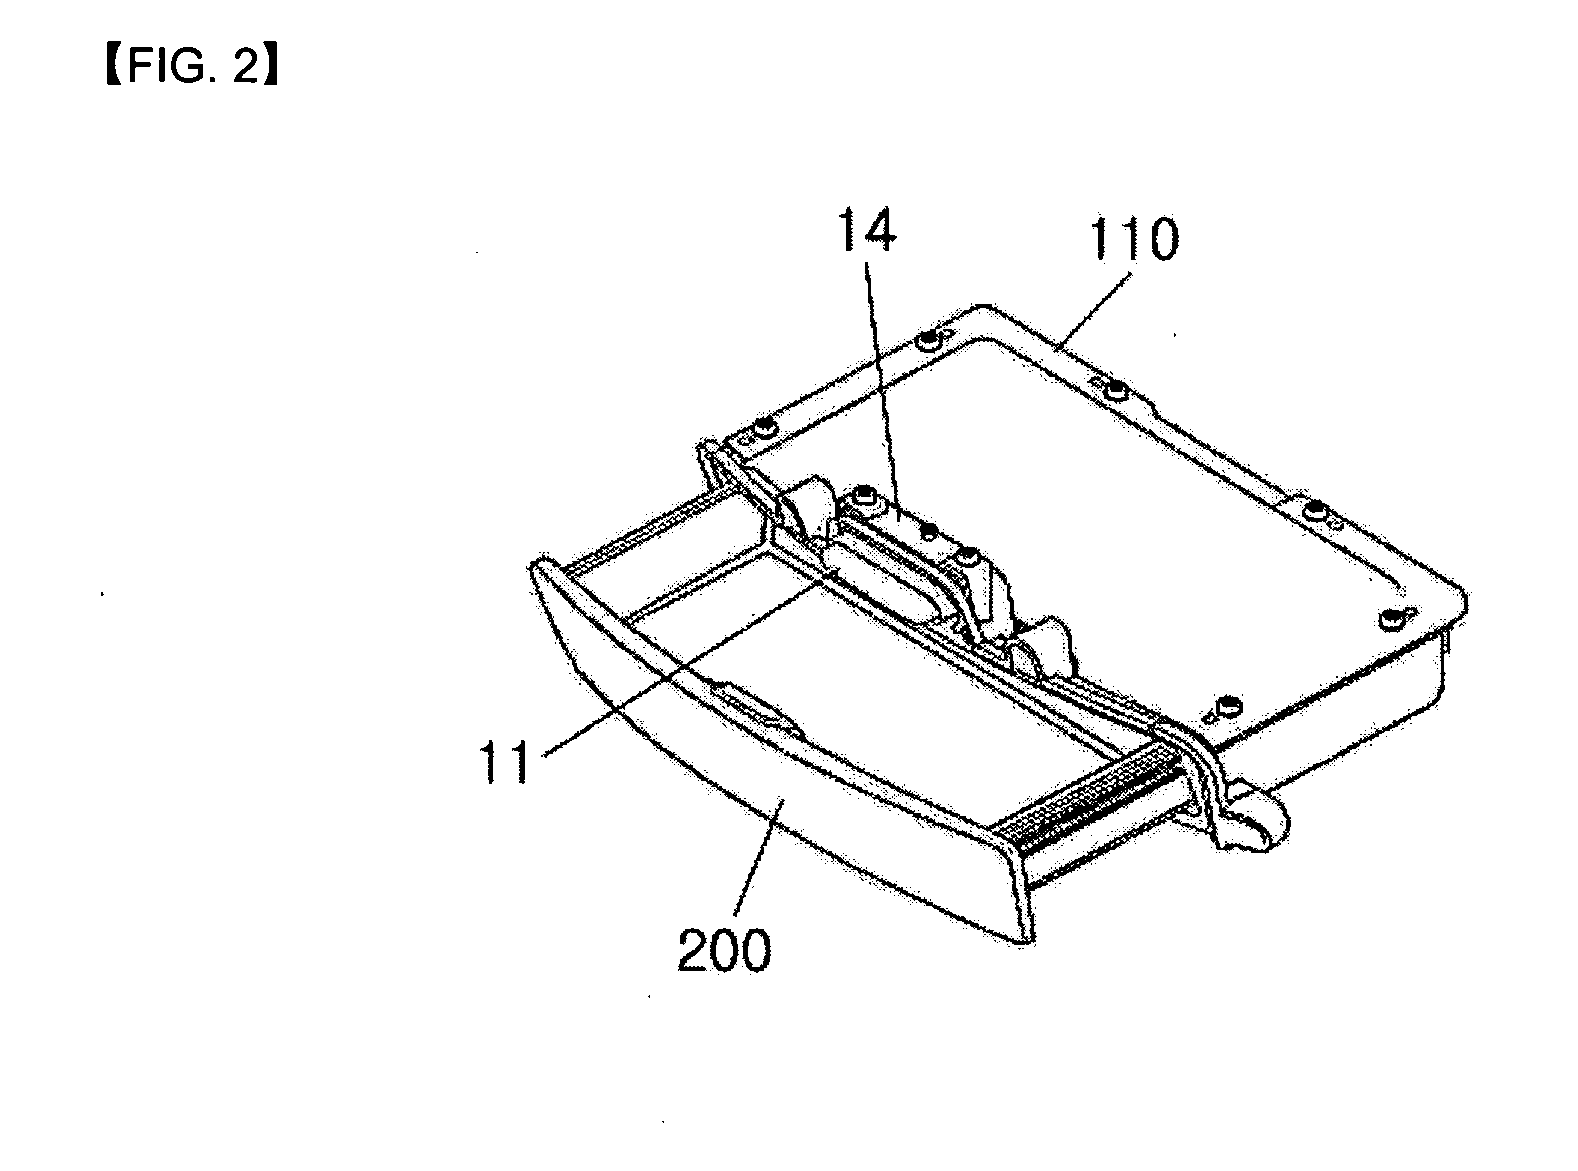 Device for locking door of tray for vehicle